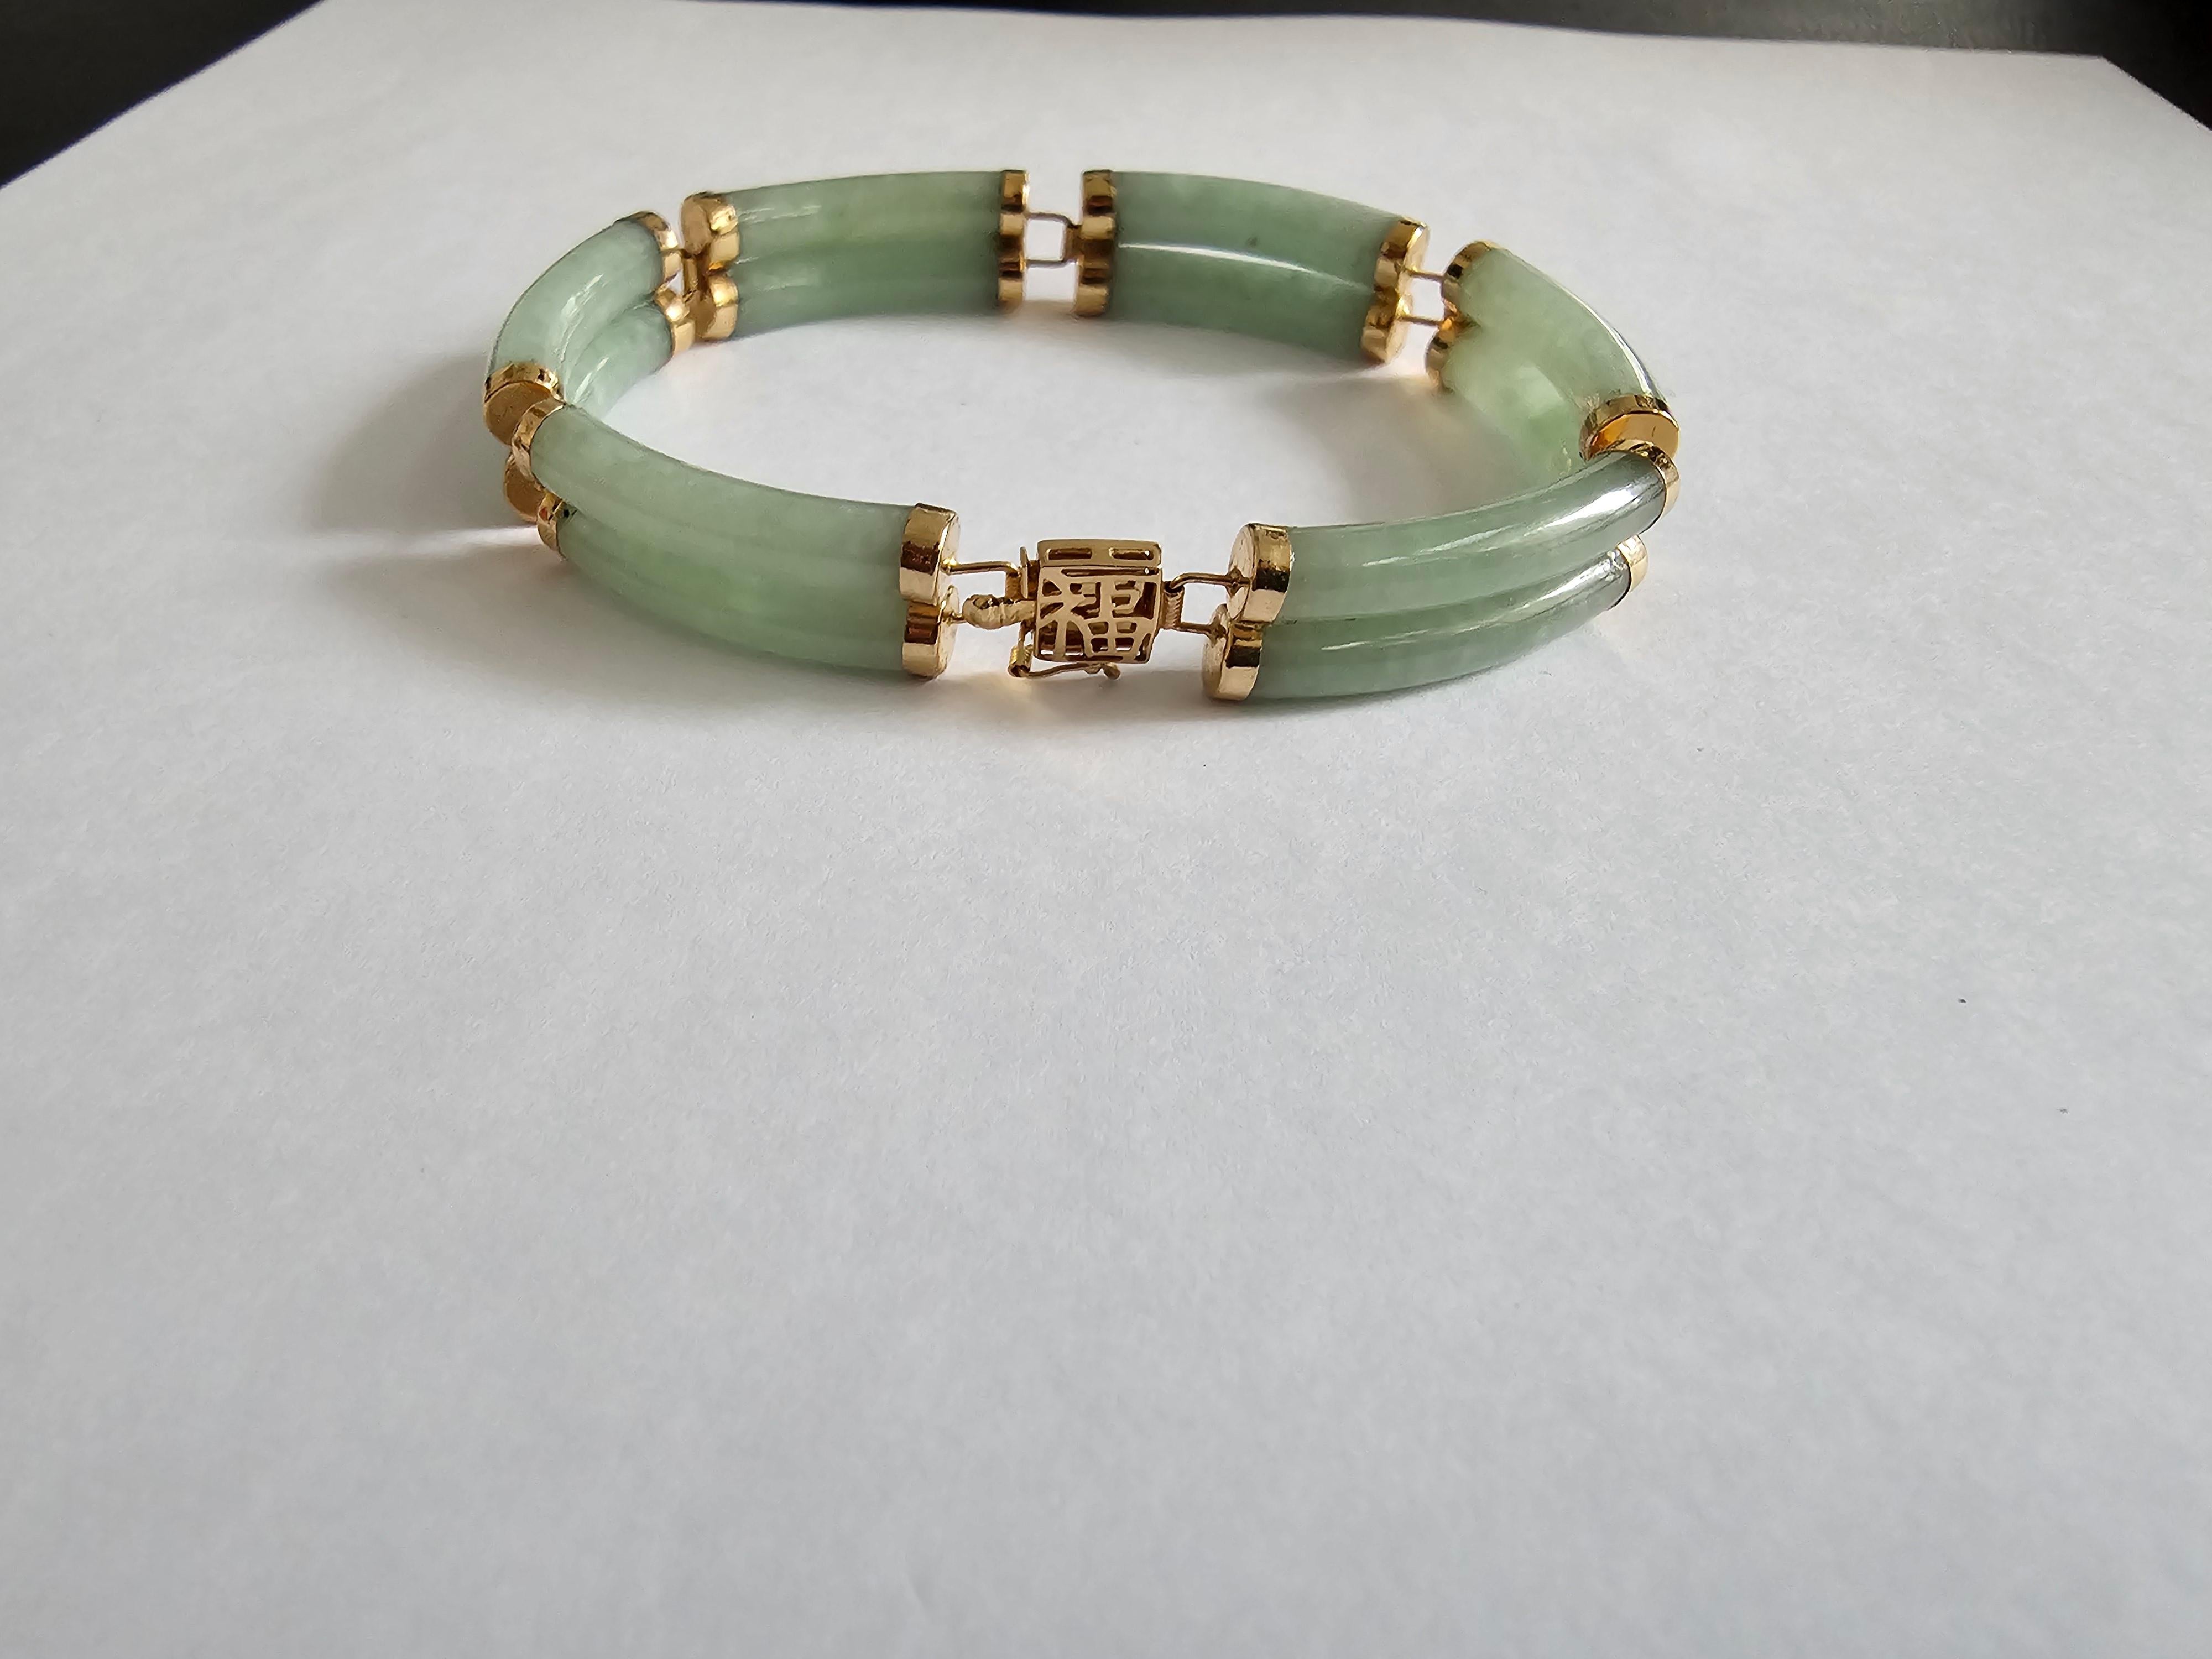 Fortune A-Jade Bracelet Double Bars with 14K Solid Yellow Gold links and clasp For Sale 6